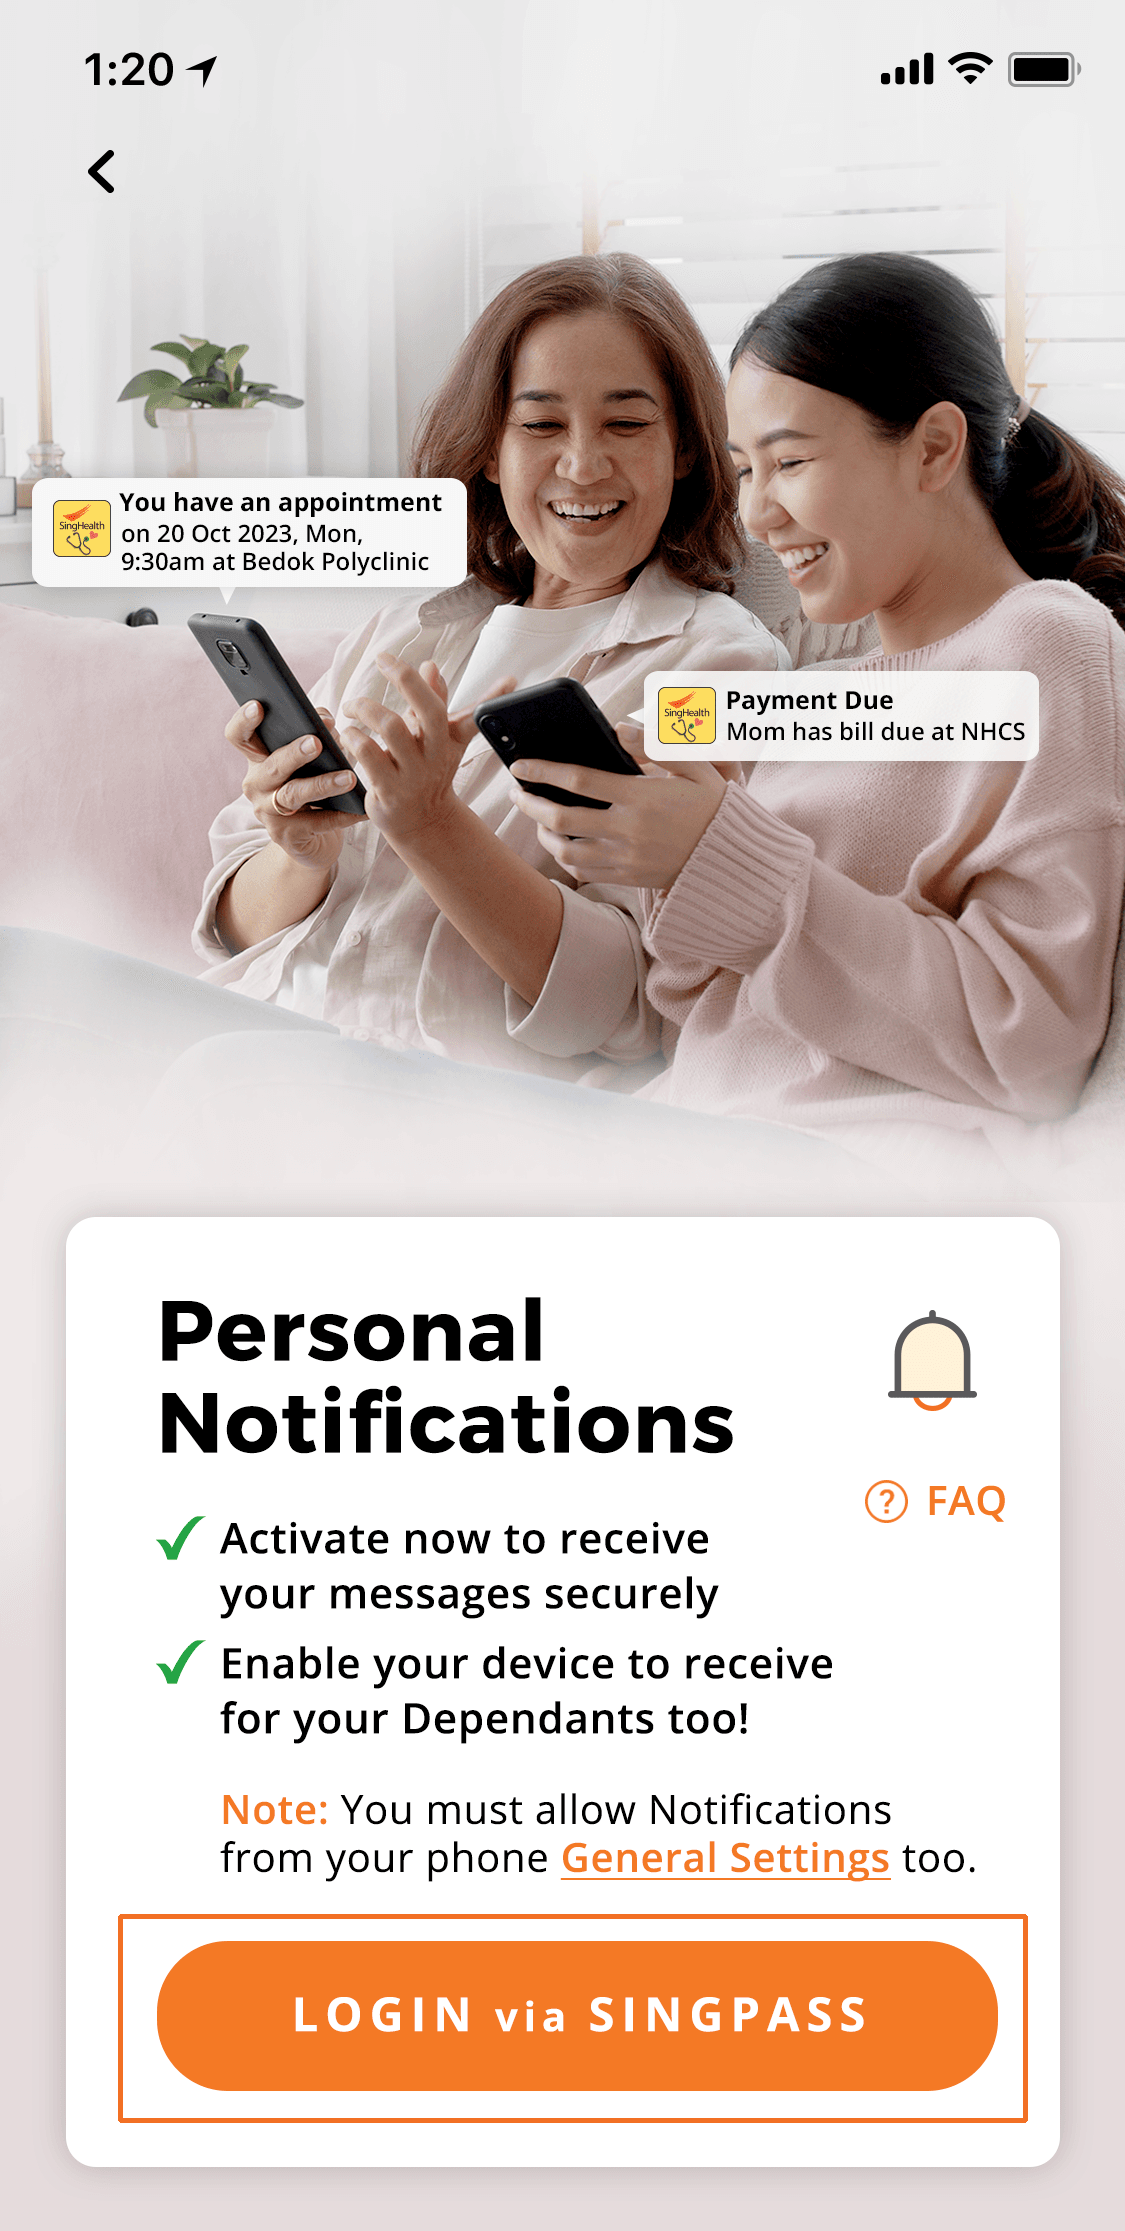 Receive notifications for your Dependants